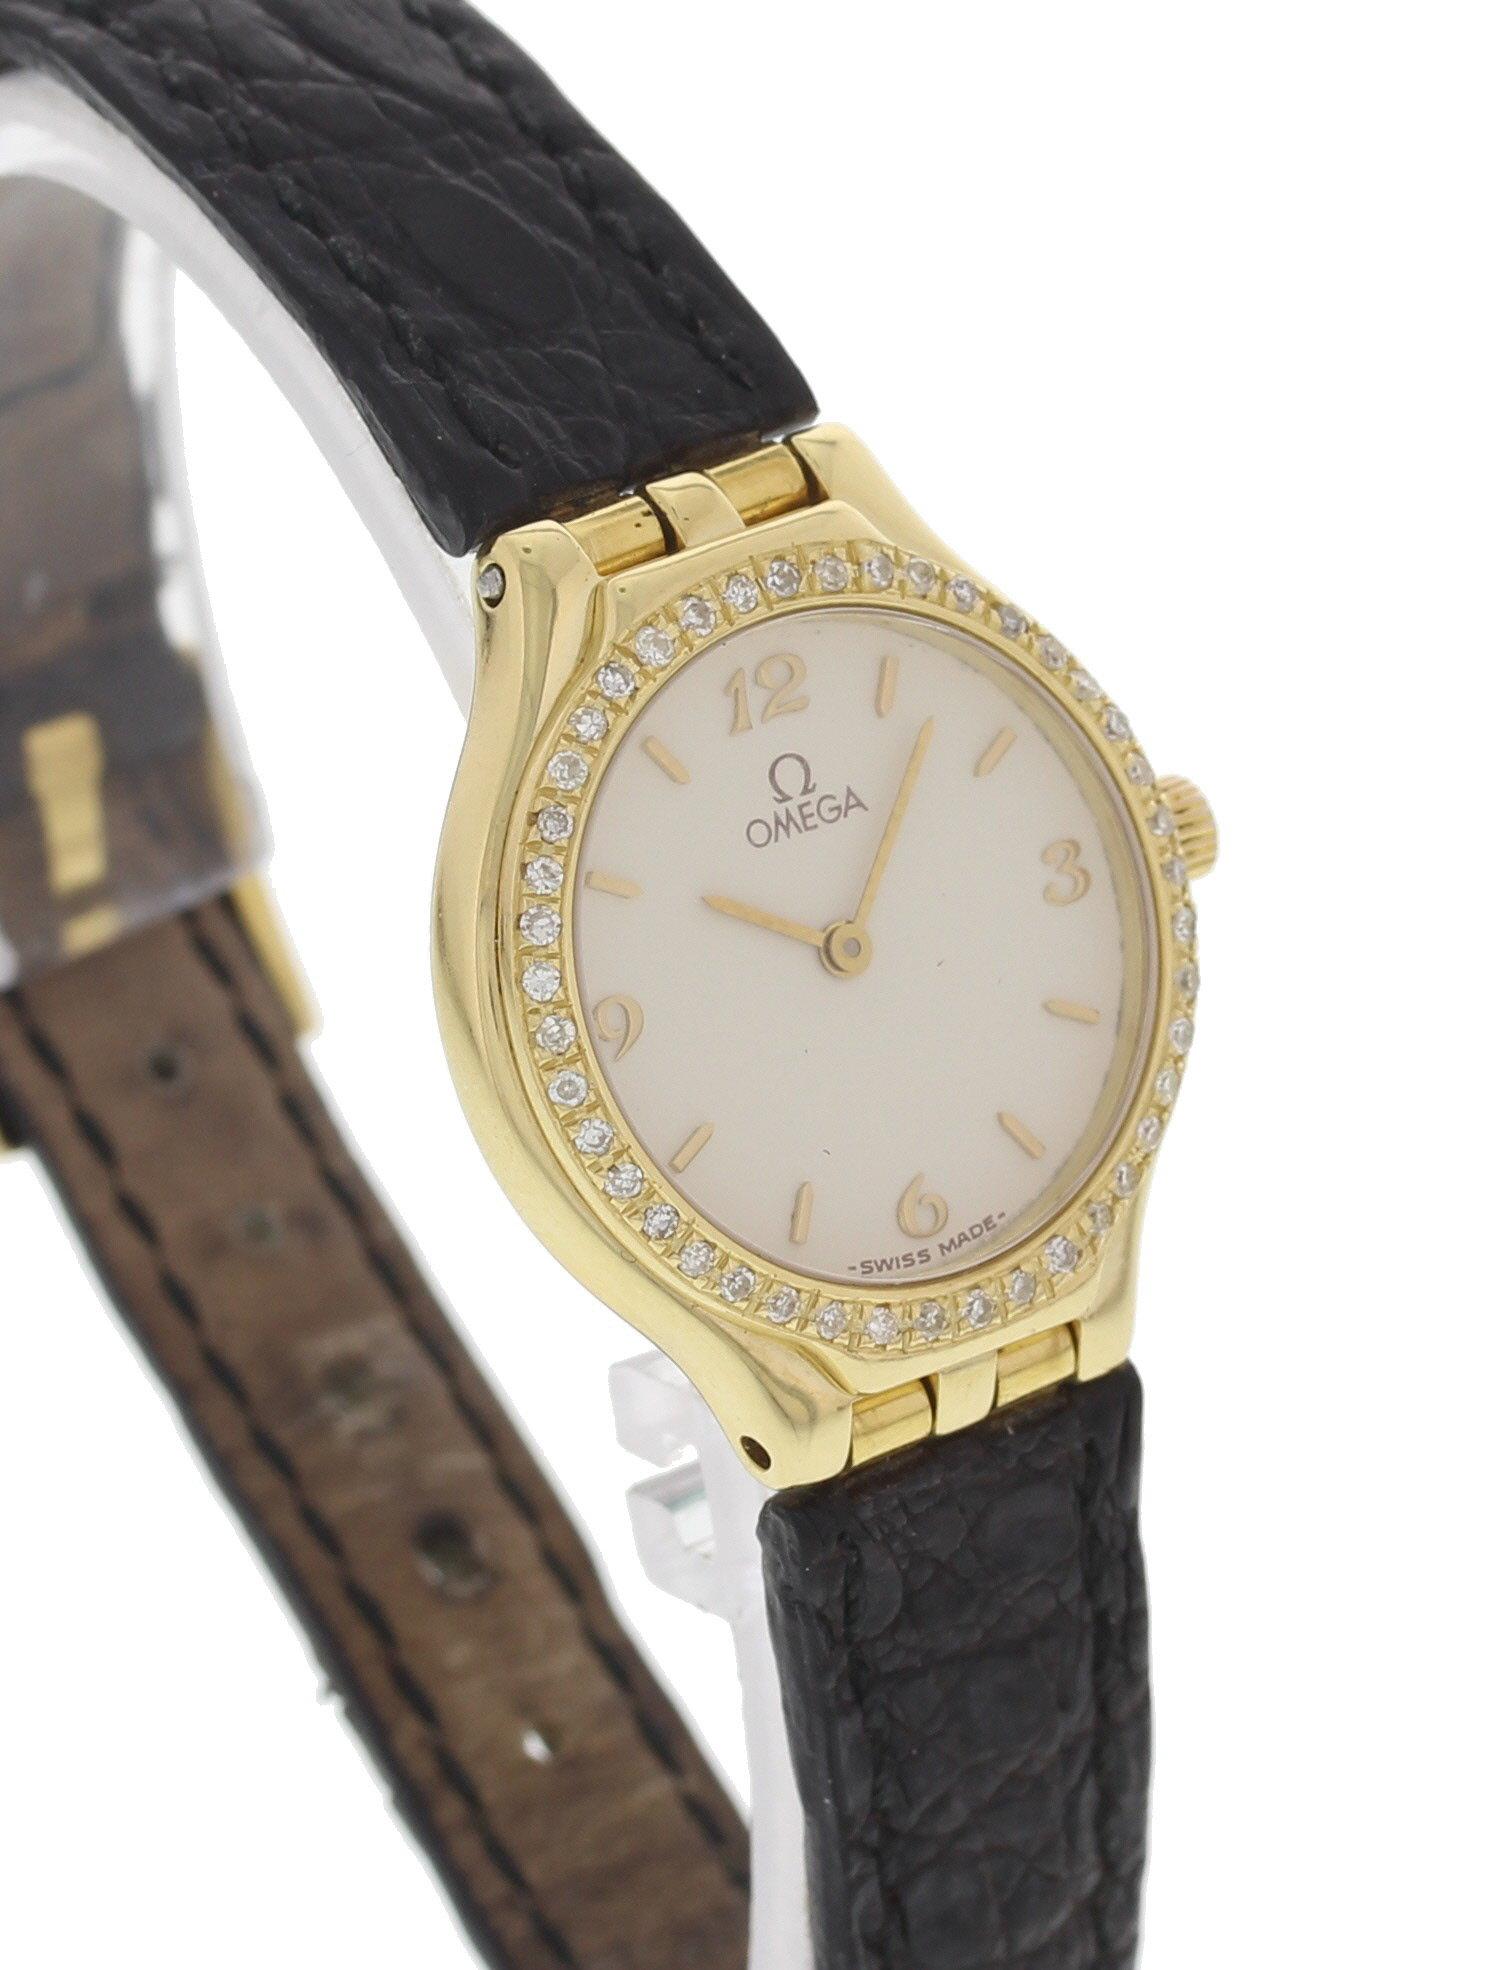 Ladies Omega 18 Karat Yellow Gold Diamond Bezel Watch In Good Condition For Sale In New York, NY